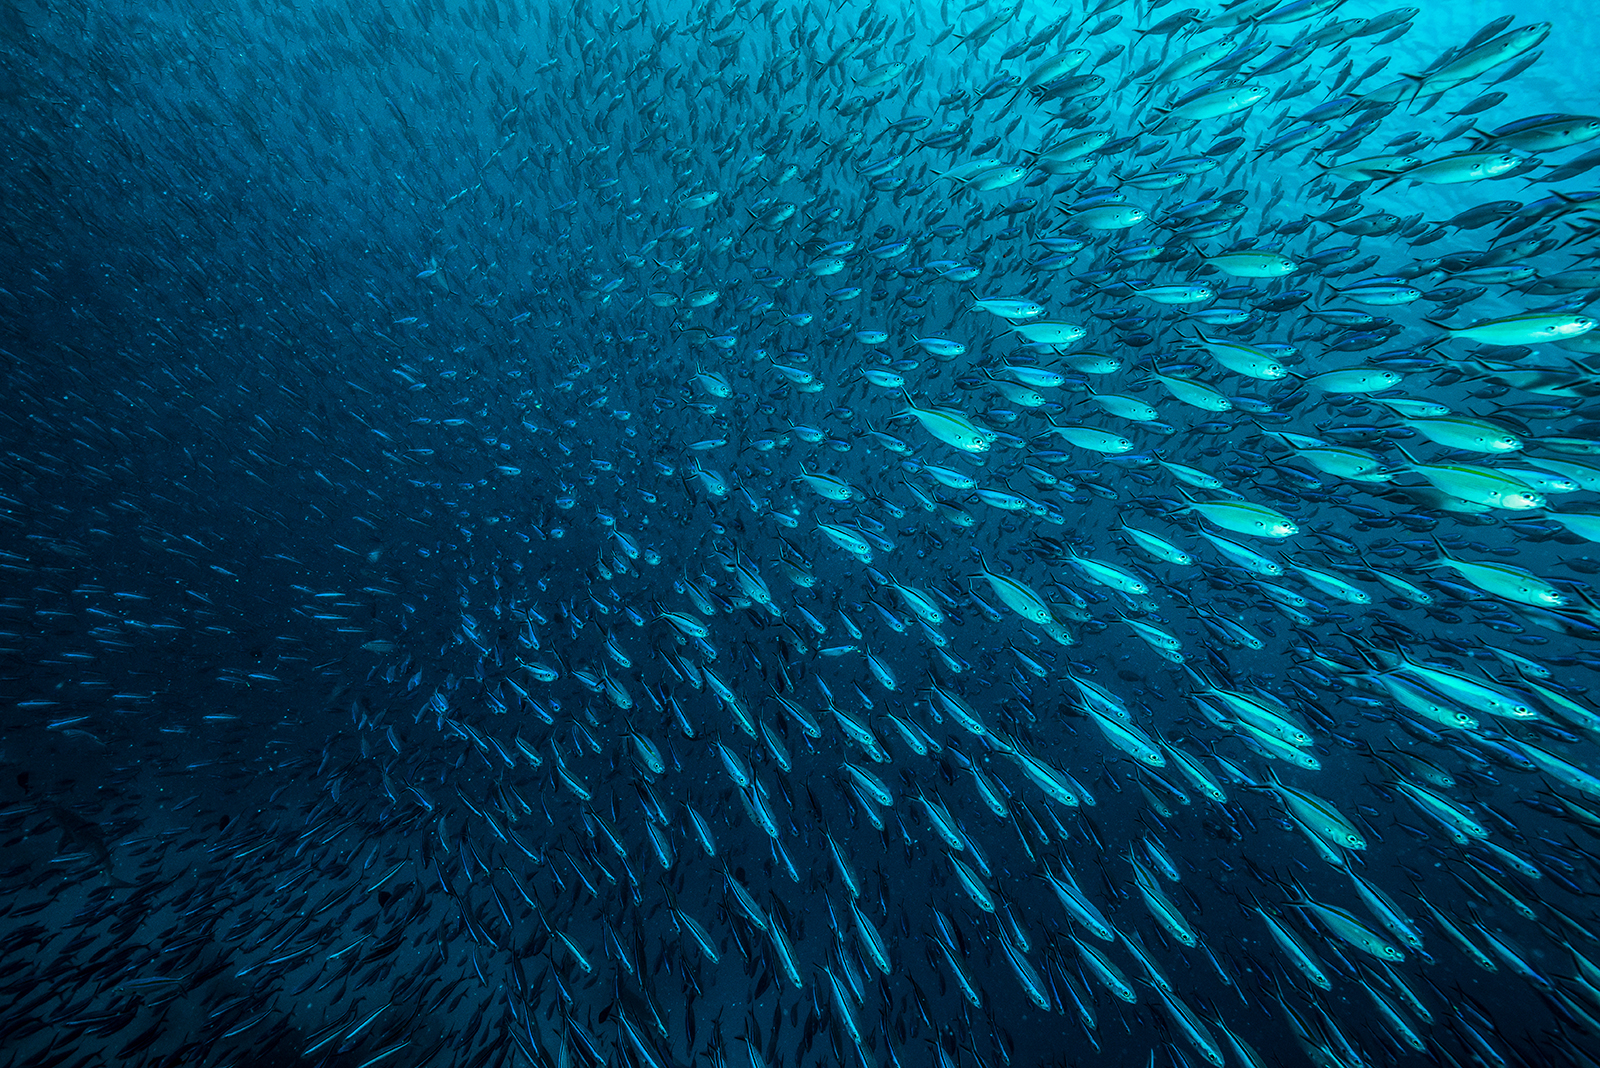 90 percent of all fish stocks are considered maximally exploited or overfished. As an alternative, cell-based fish, produced with the help of modern biotechnology, can make decisive contribution to secure the global supply of animal protein in the future.